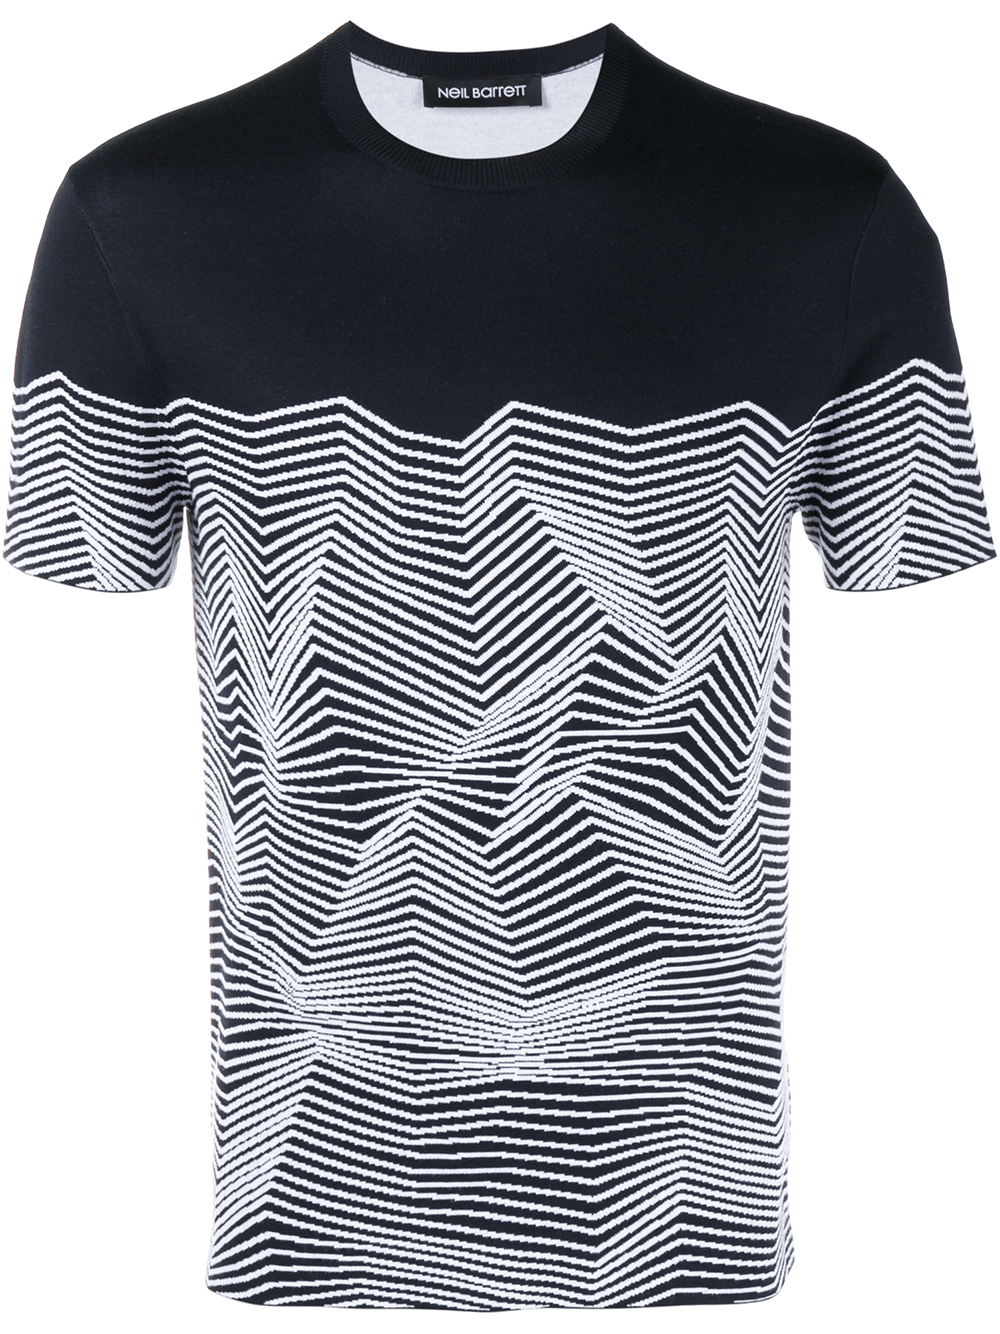 Neil barrett Jersey Optical Illusion Top in Blue for Men | Lyst